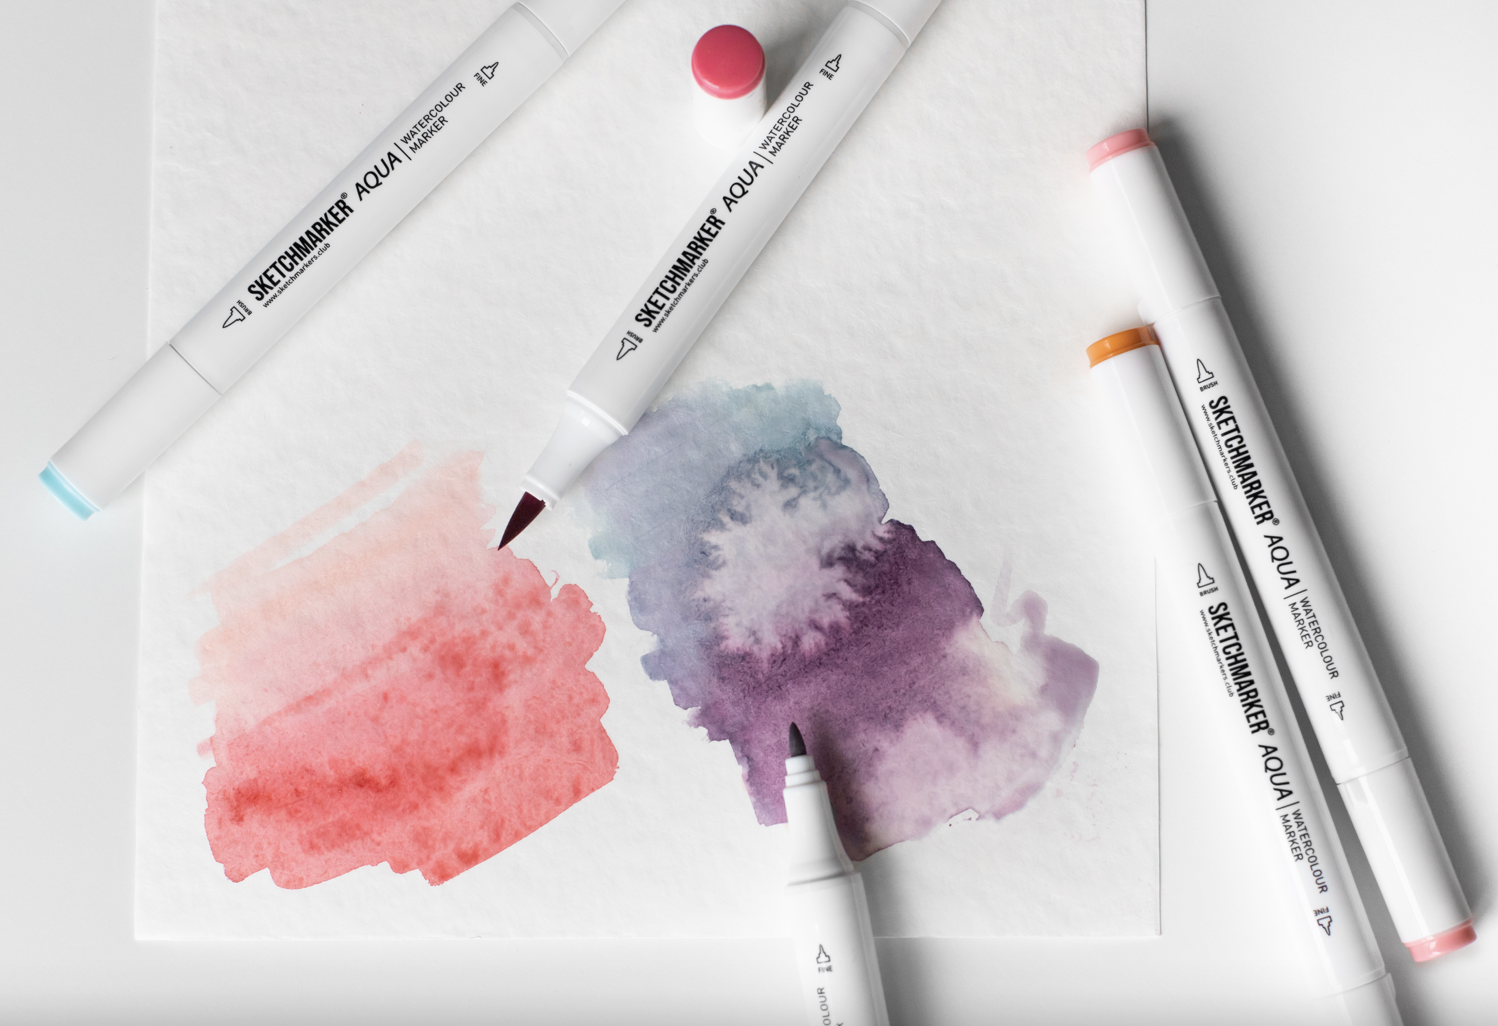 Sketchmarker Club BrushPro Marker Review and Sketchmarker Liners  The Art  Gear Guide